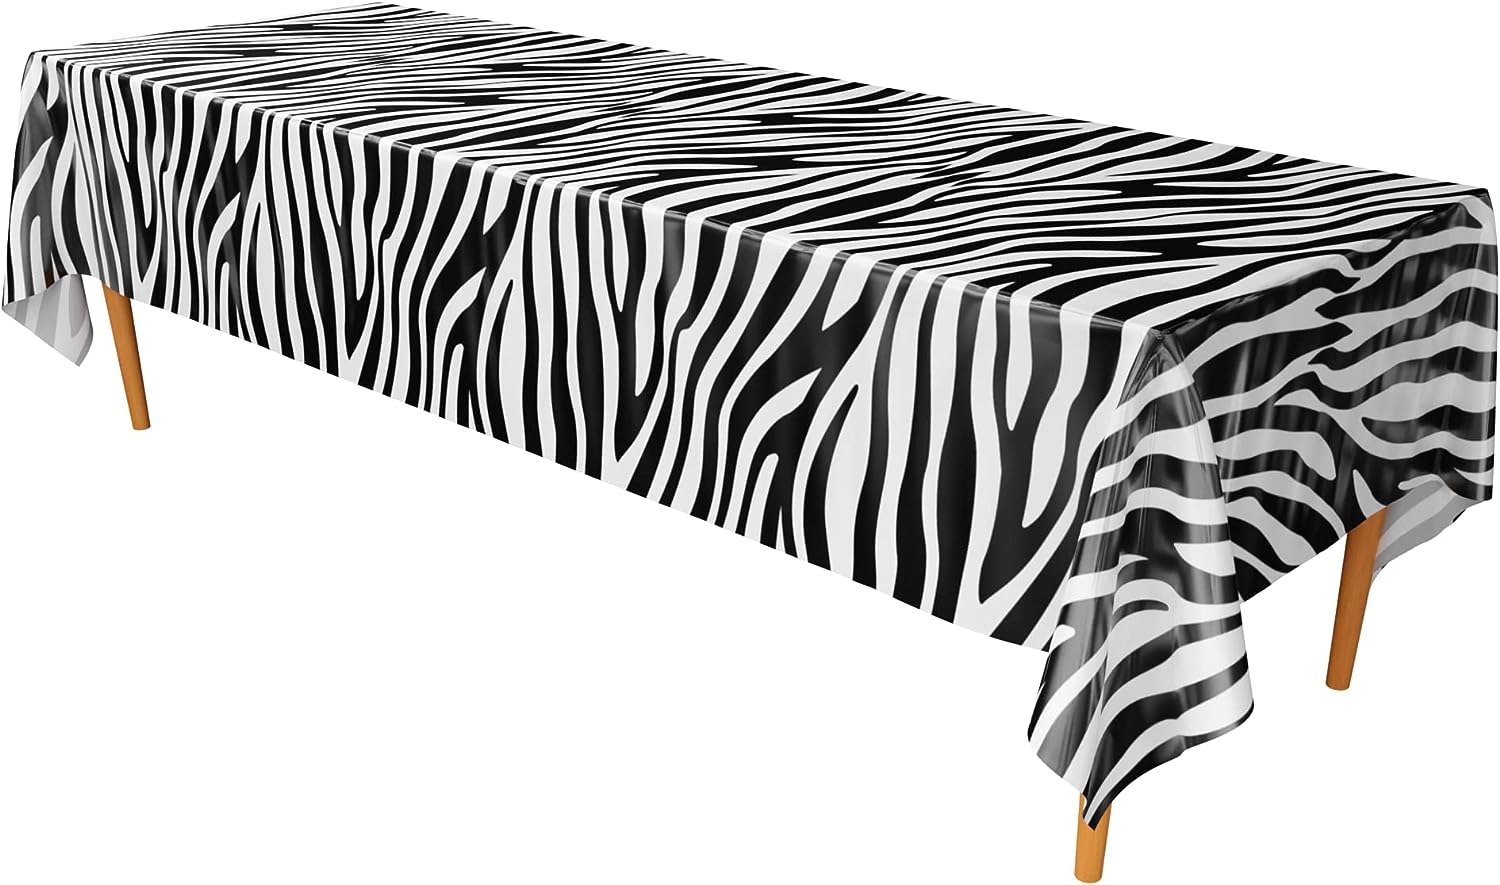 Zebra Stripe Table Covers with bold black and white stripes, adding a touch of wild elegance to your party decorations or table setting.